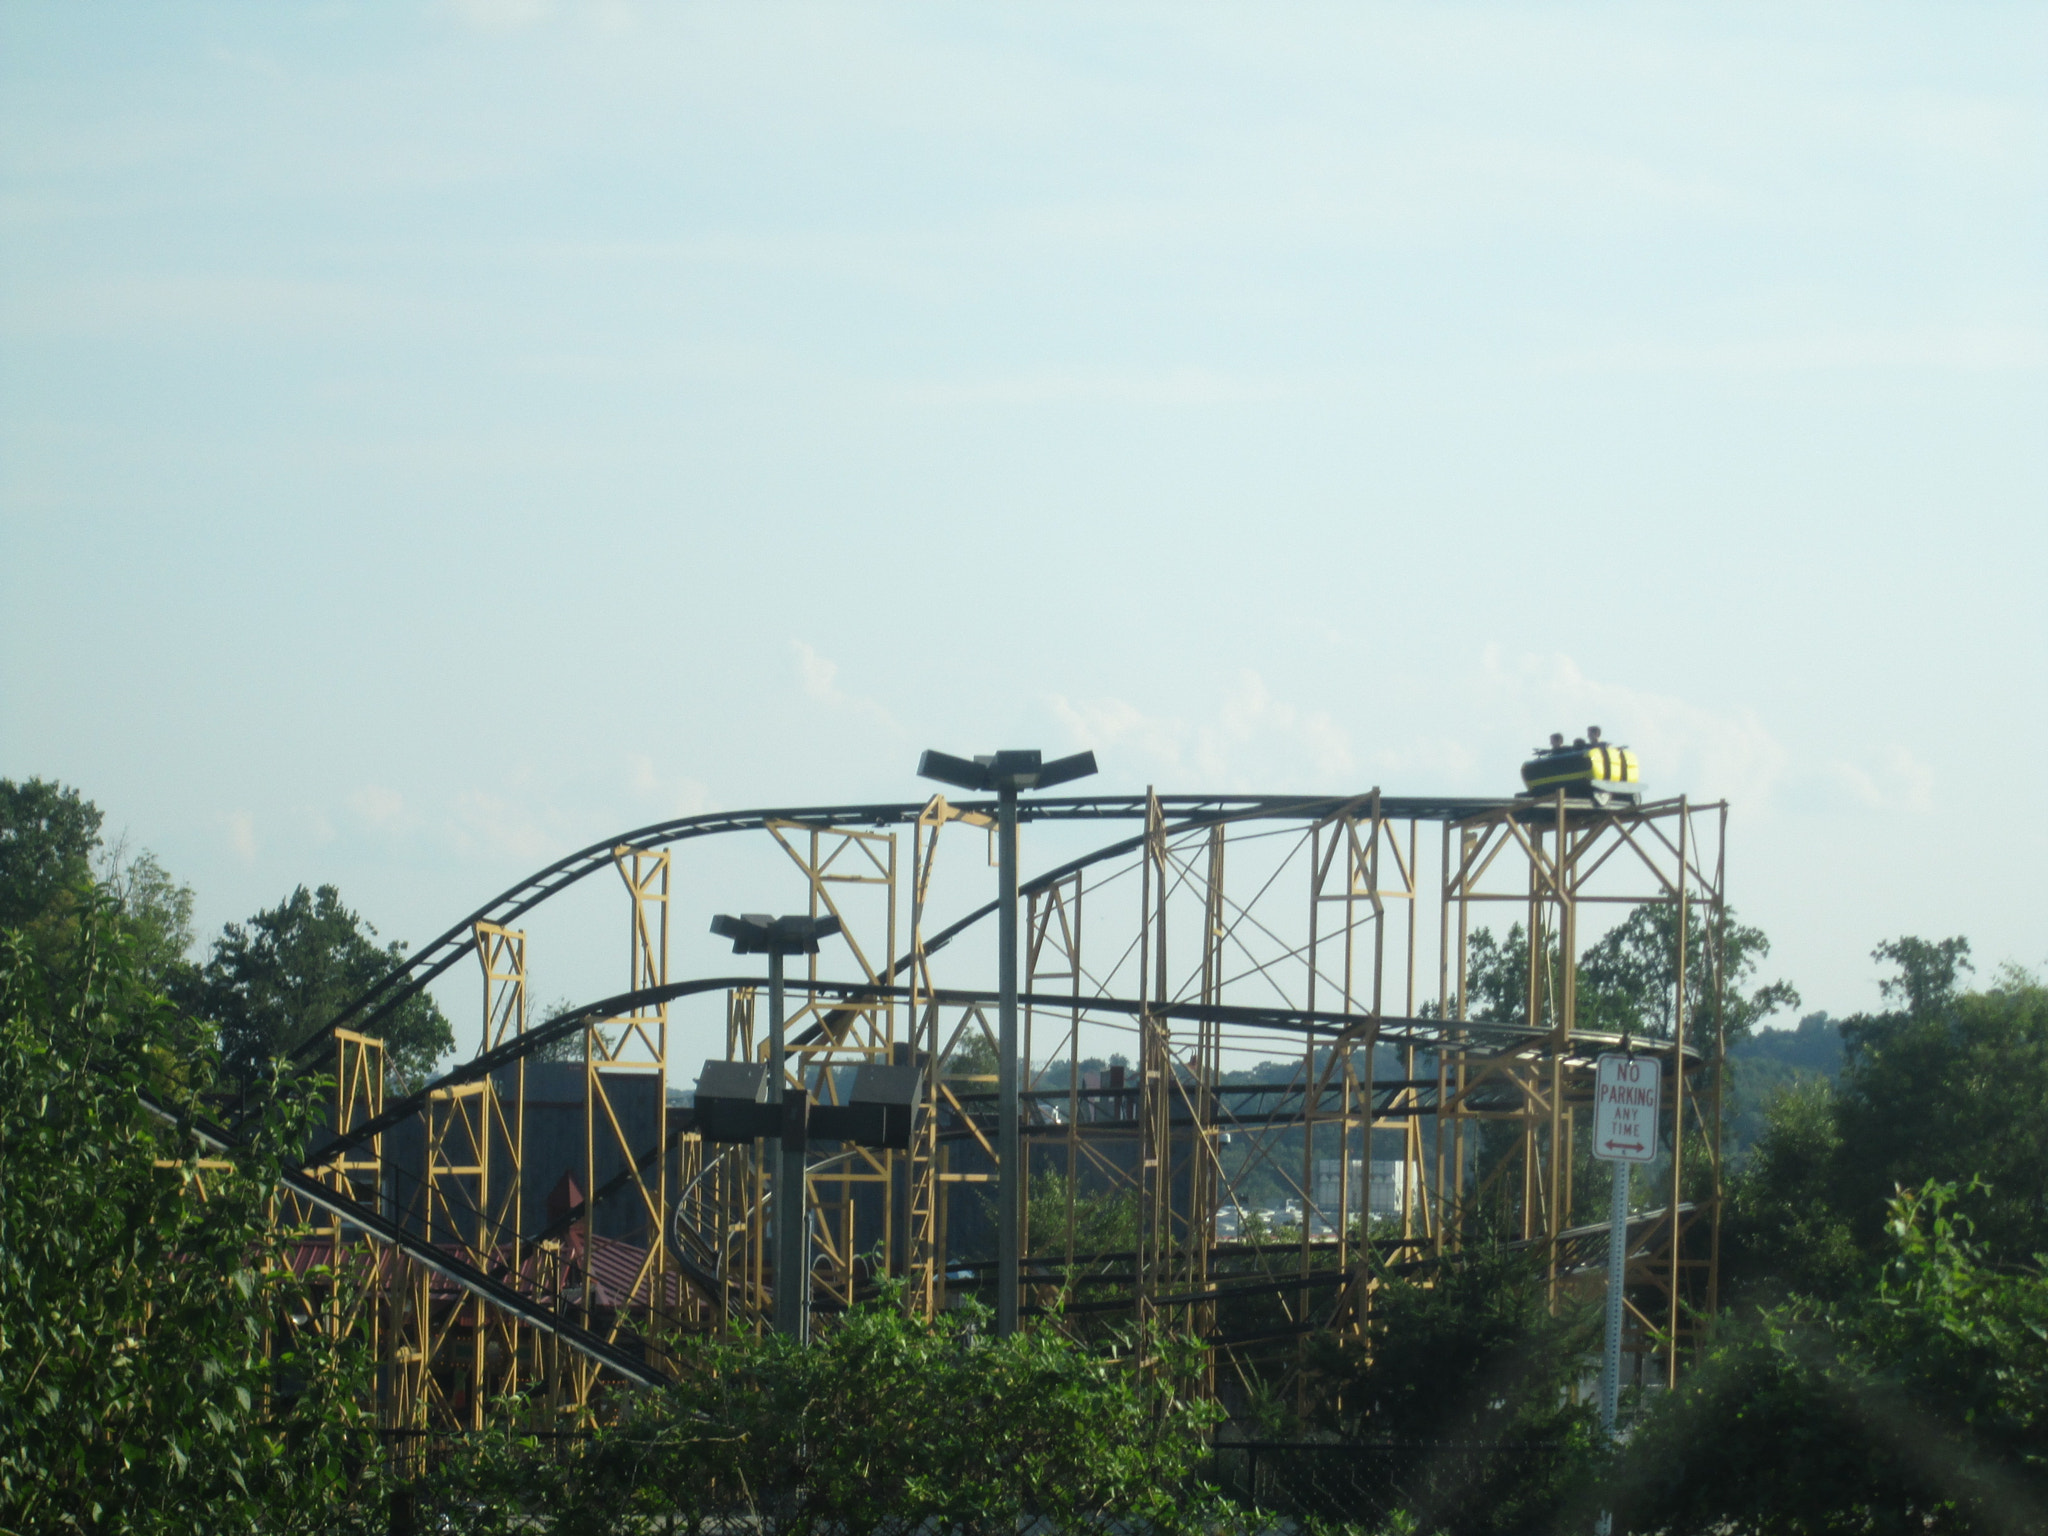 Canon PowerShot A3400 IS sample photo. Roller coaster in middle of no where photography